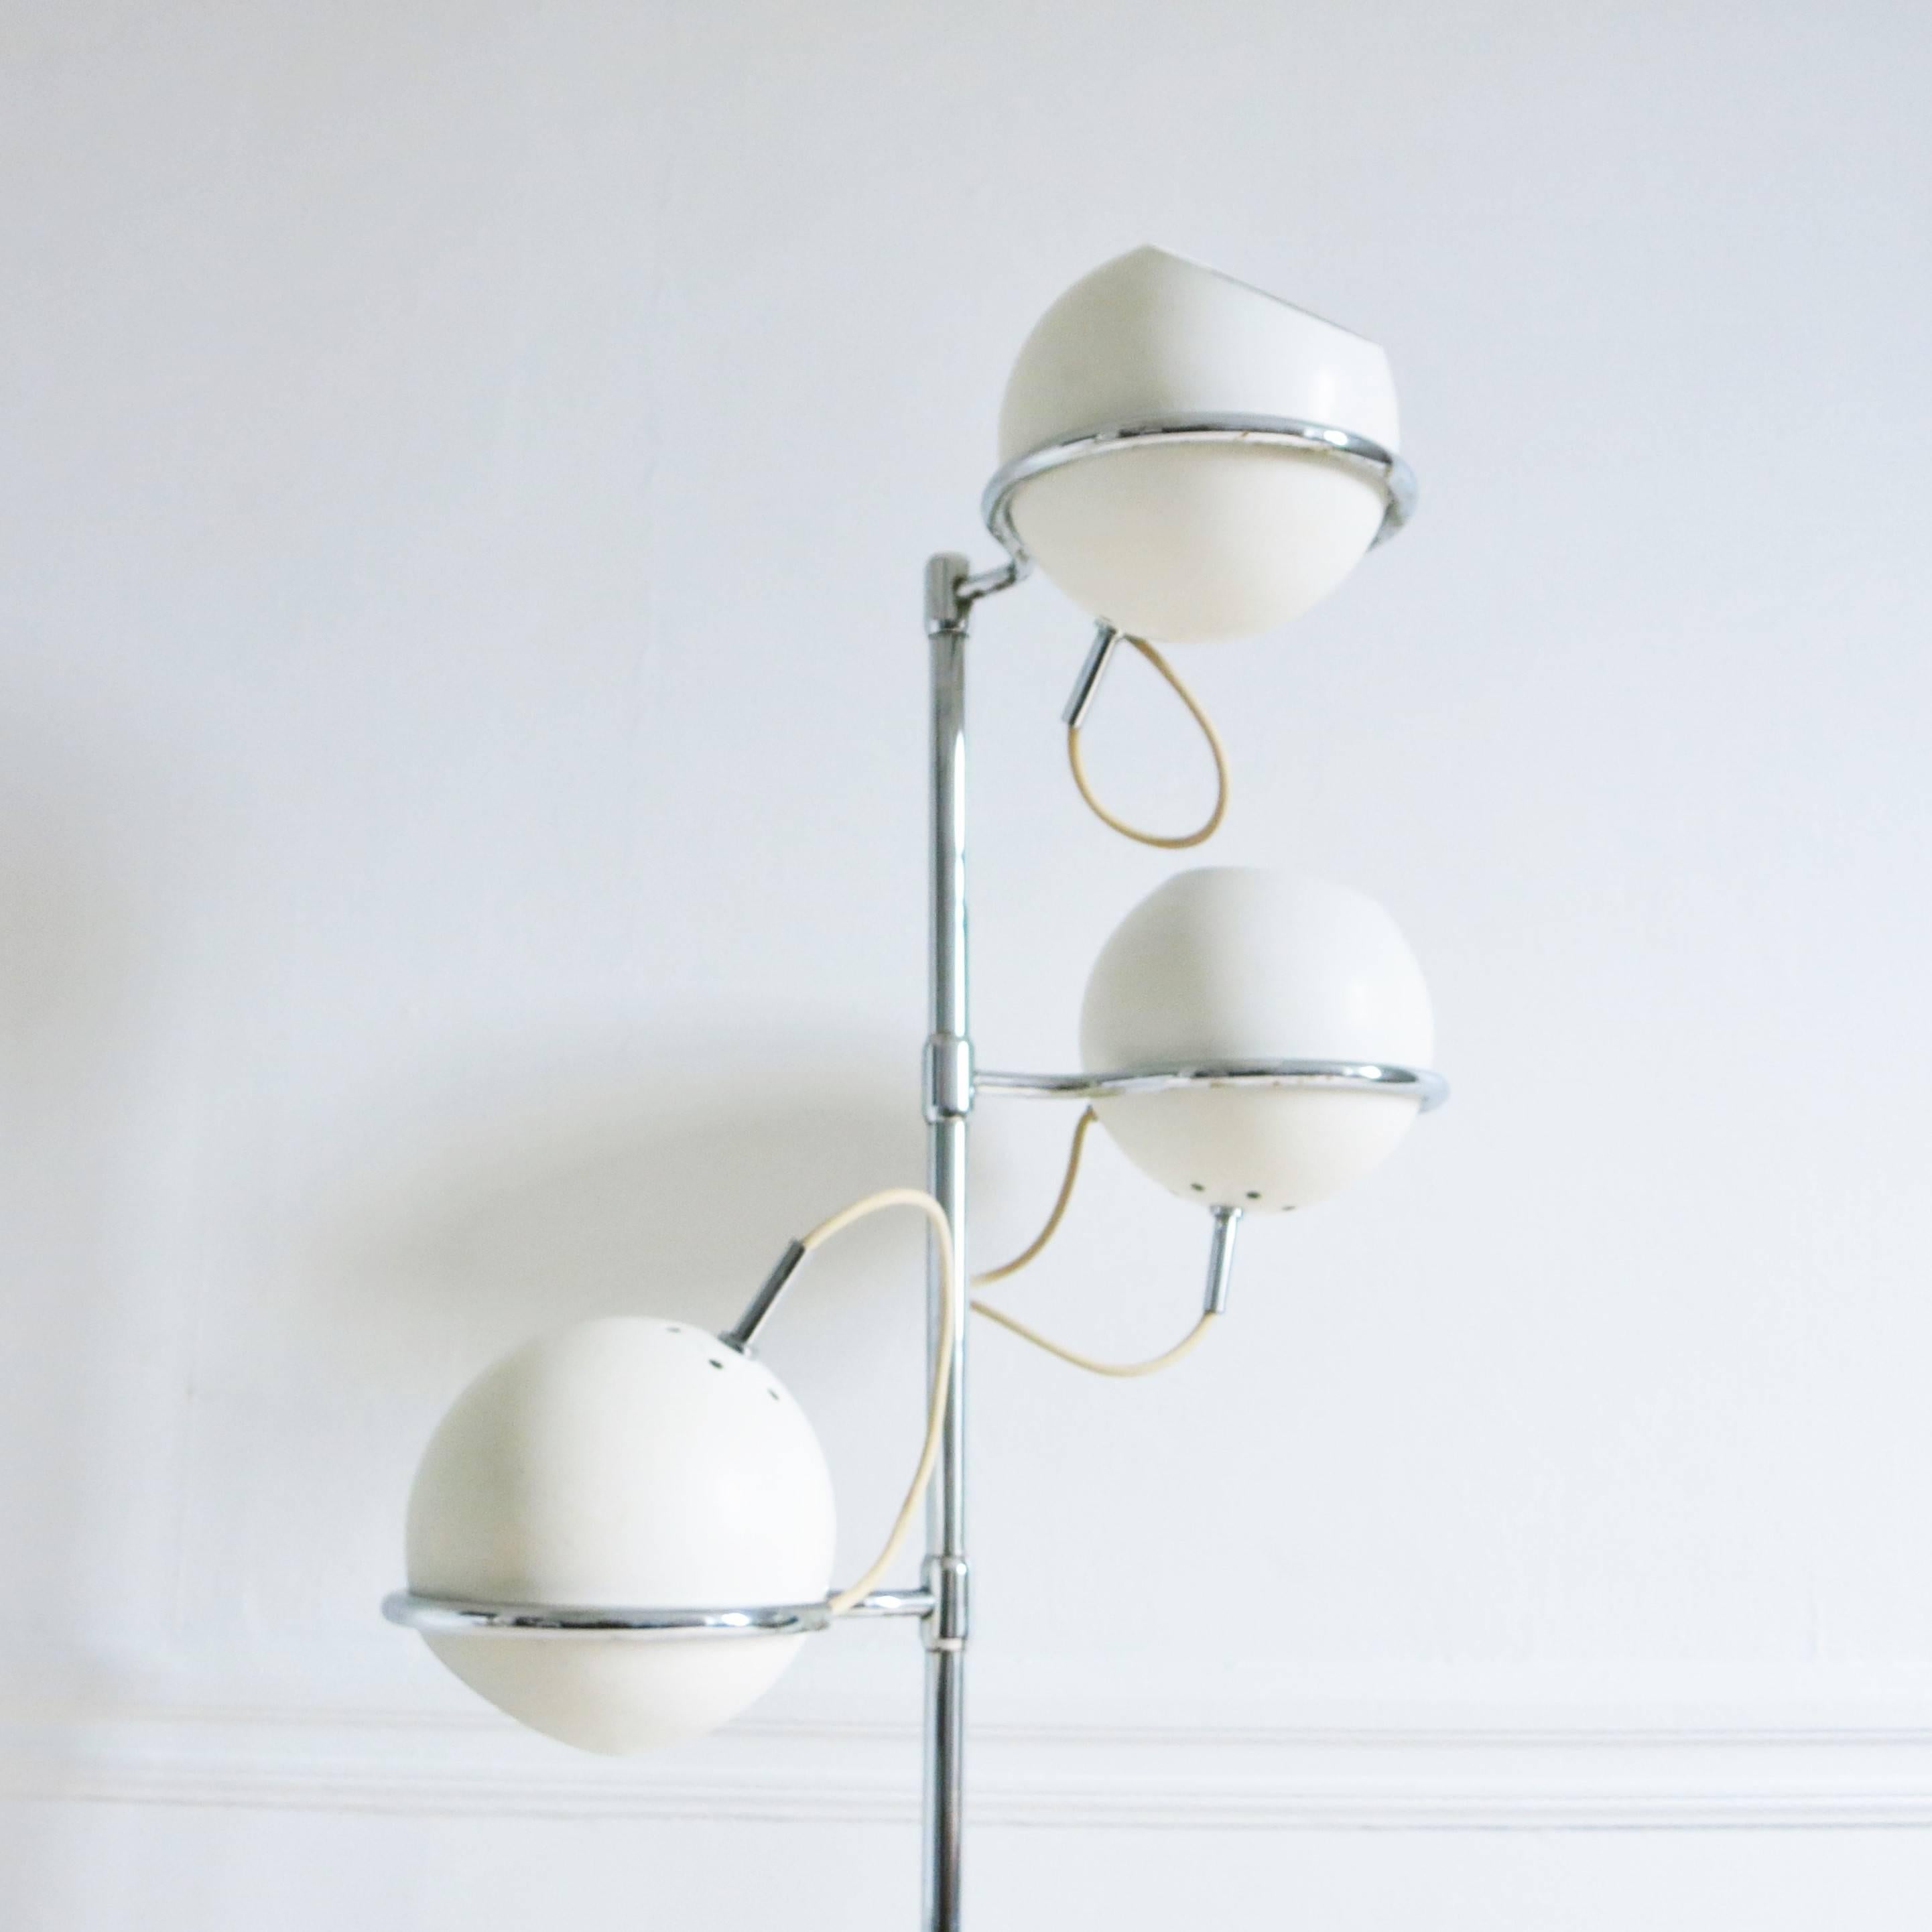 Floor lamp with three adjustable and rotable white laquered balls deigned by Etienne Fermigier for Monix, circa 1965. Rod and arms in chrome metal. 
Labelled 